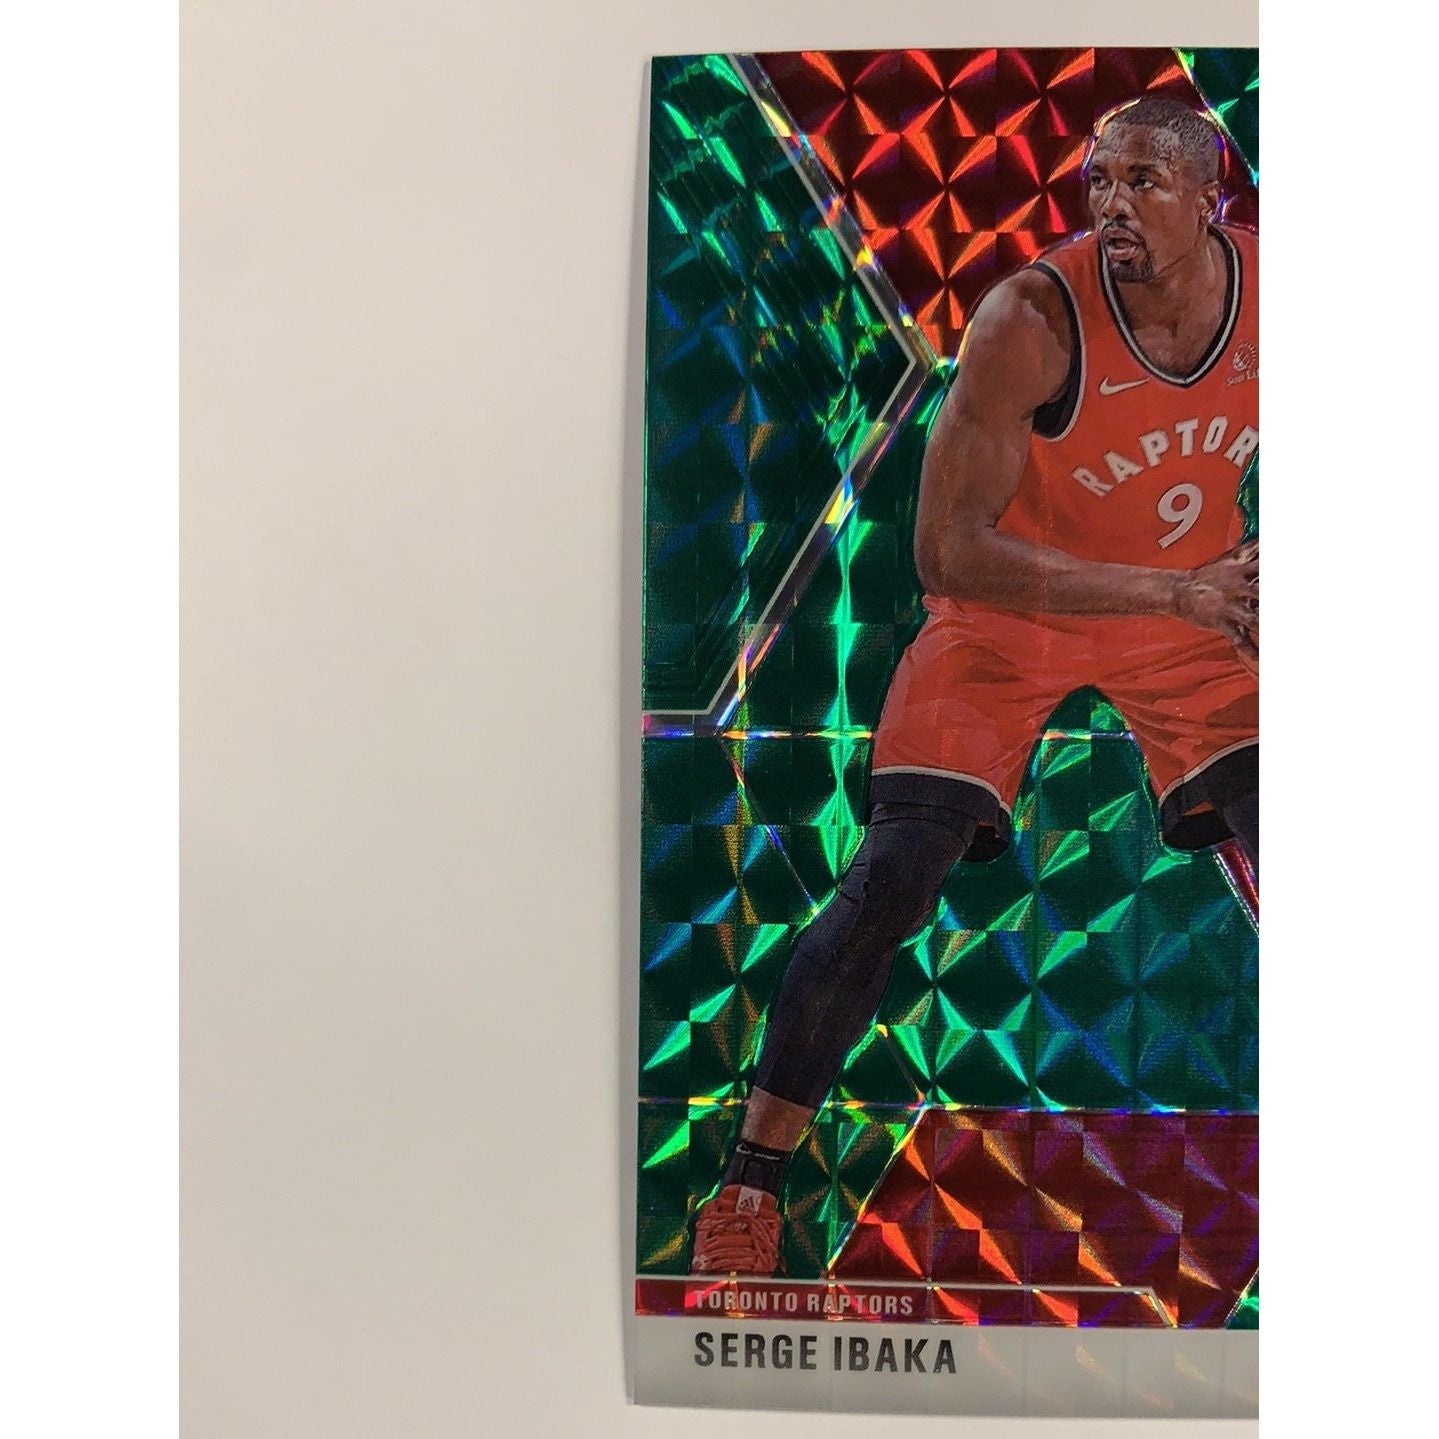  2019-20 Mosaic Serge Ibaka Green Prizm  Local Legends Cards & Collectibles